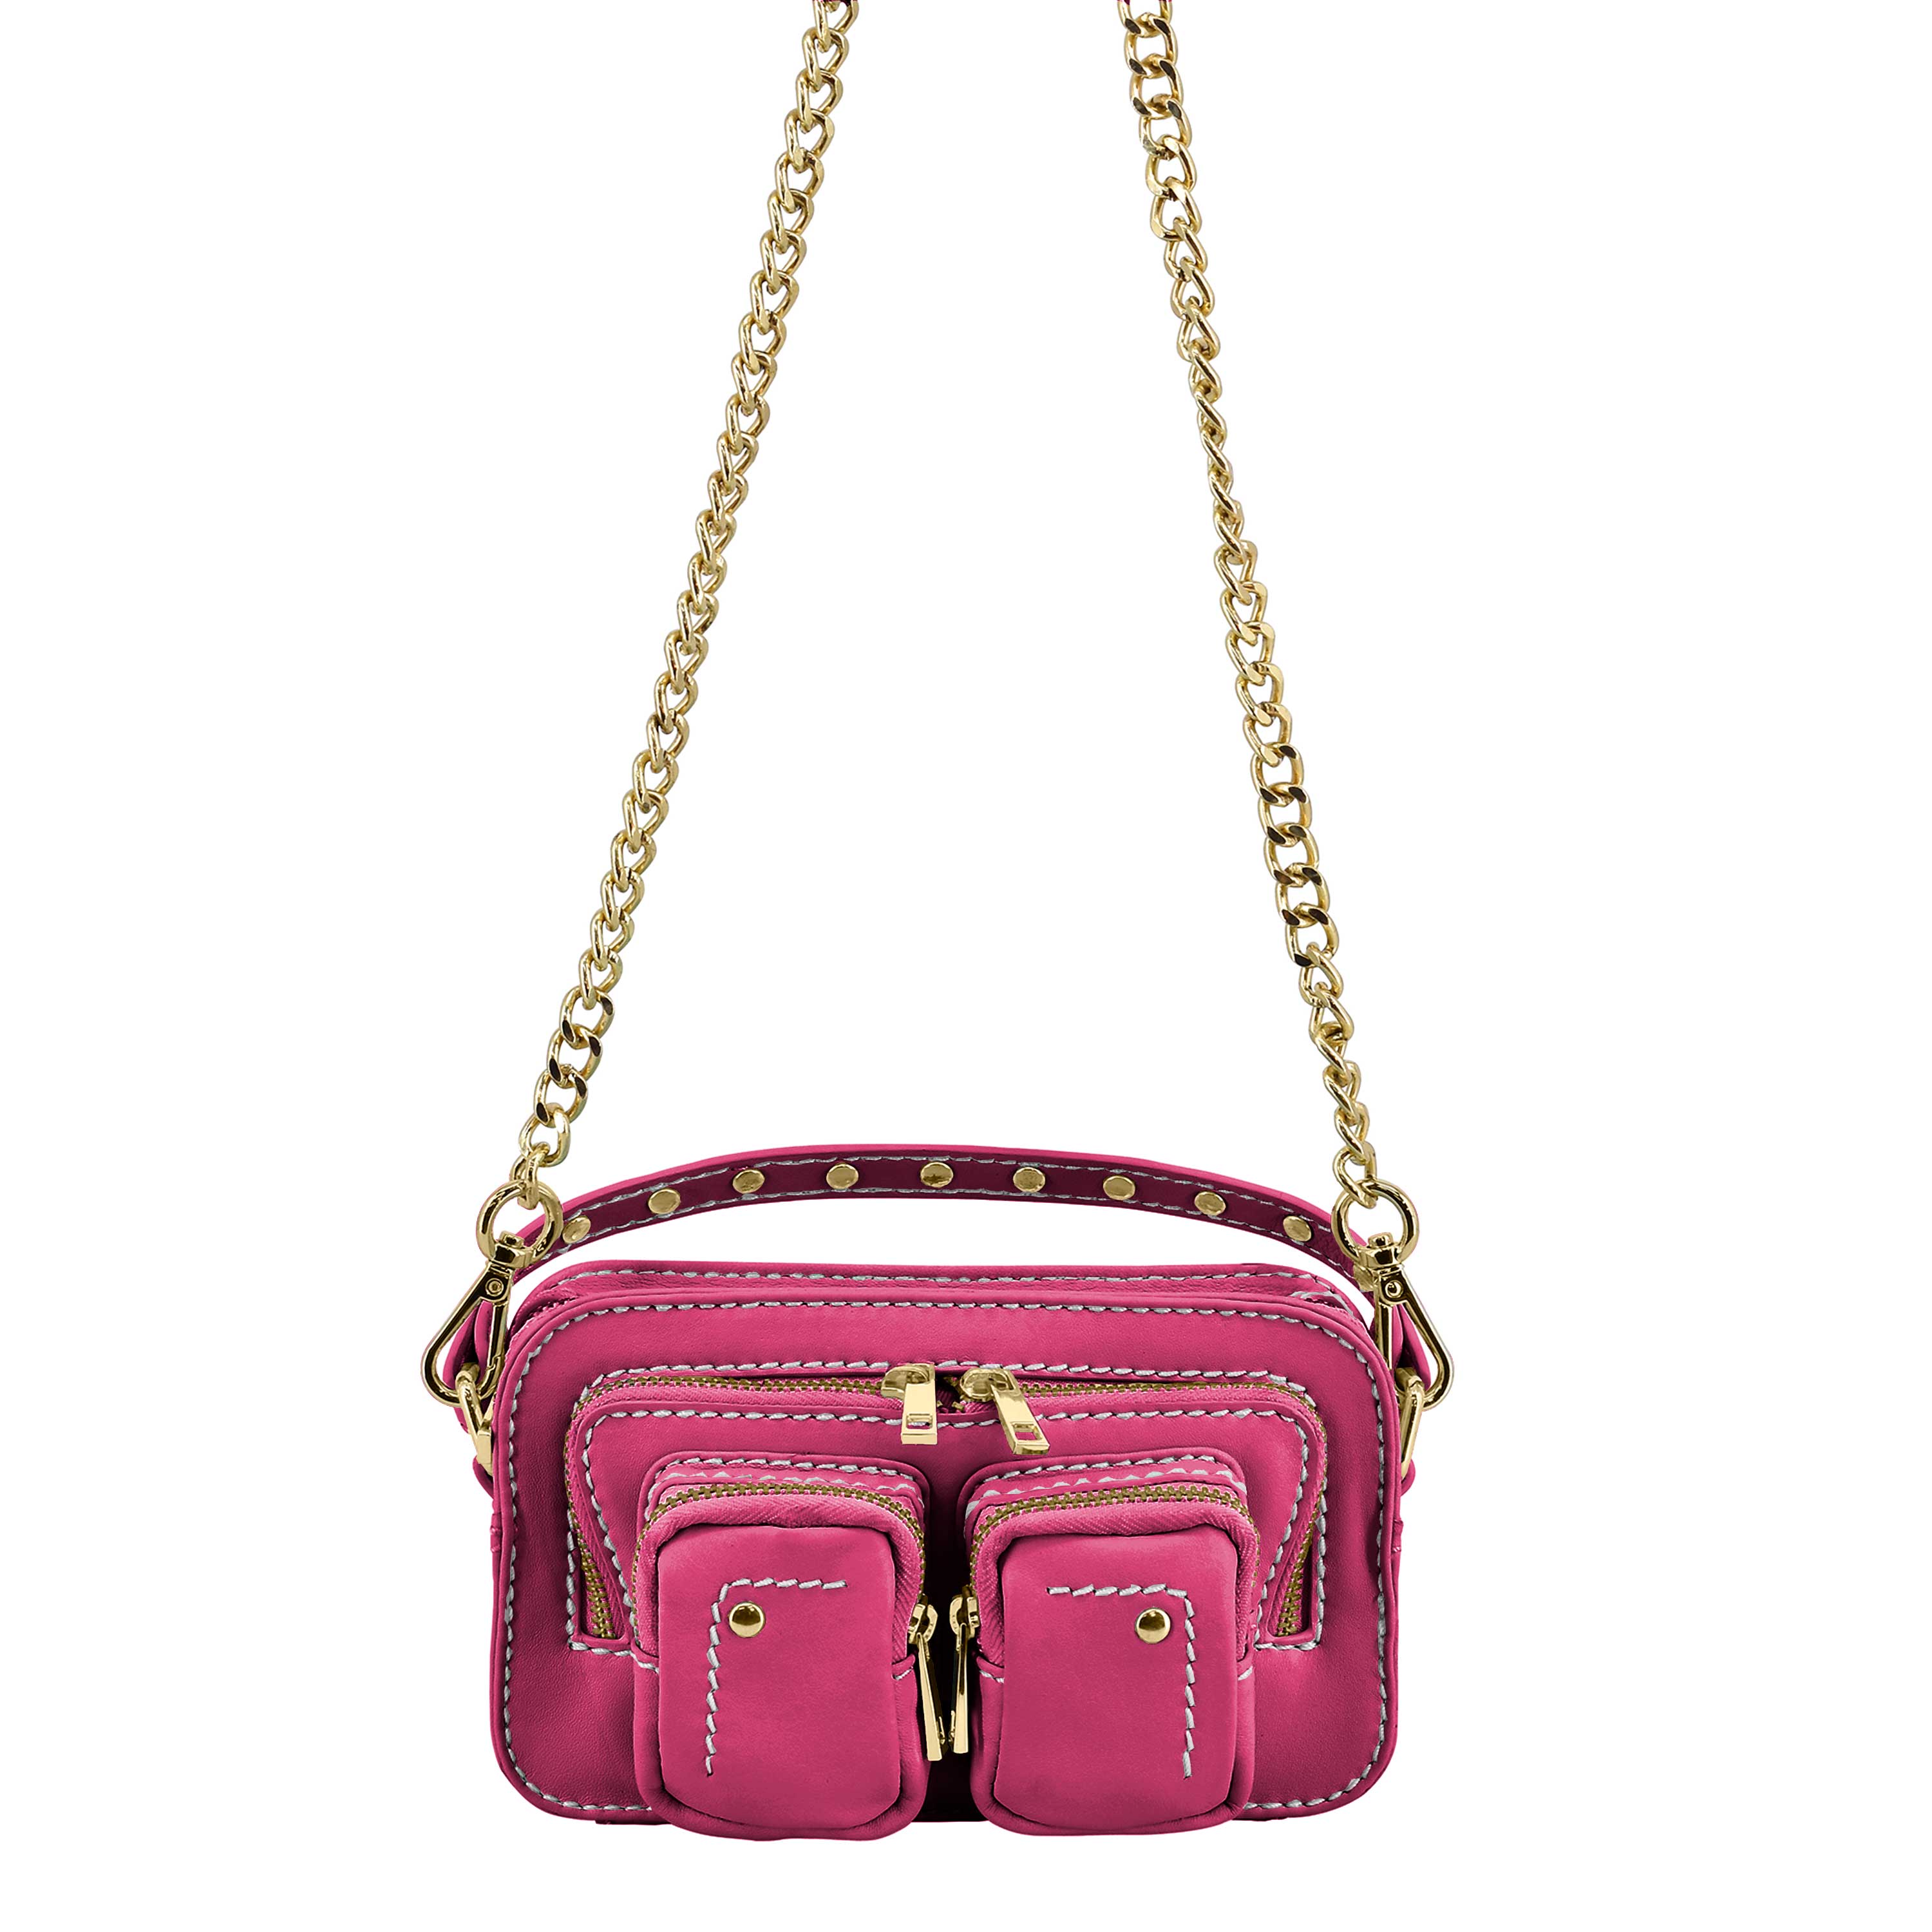 Ted Baker - Where would you take Ted's HELENA bag this weekend? Shop now:  http://bitly.com/2VvqDiE | Facebook